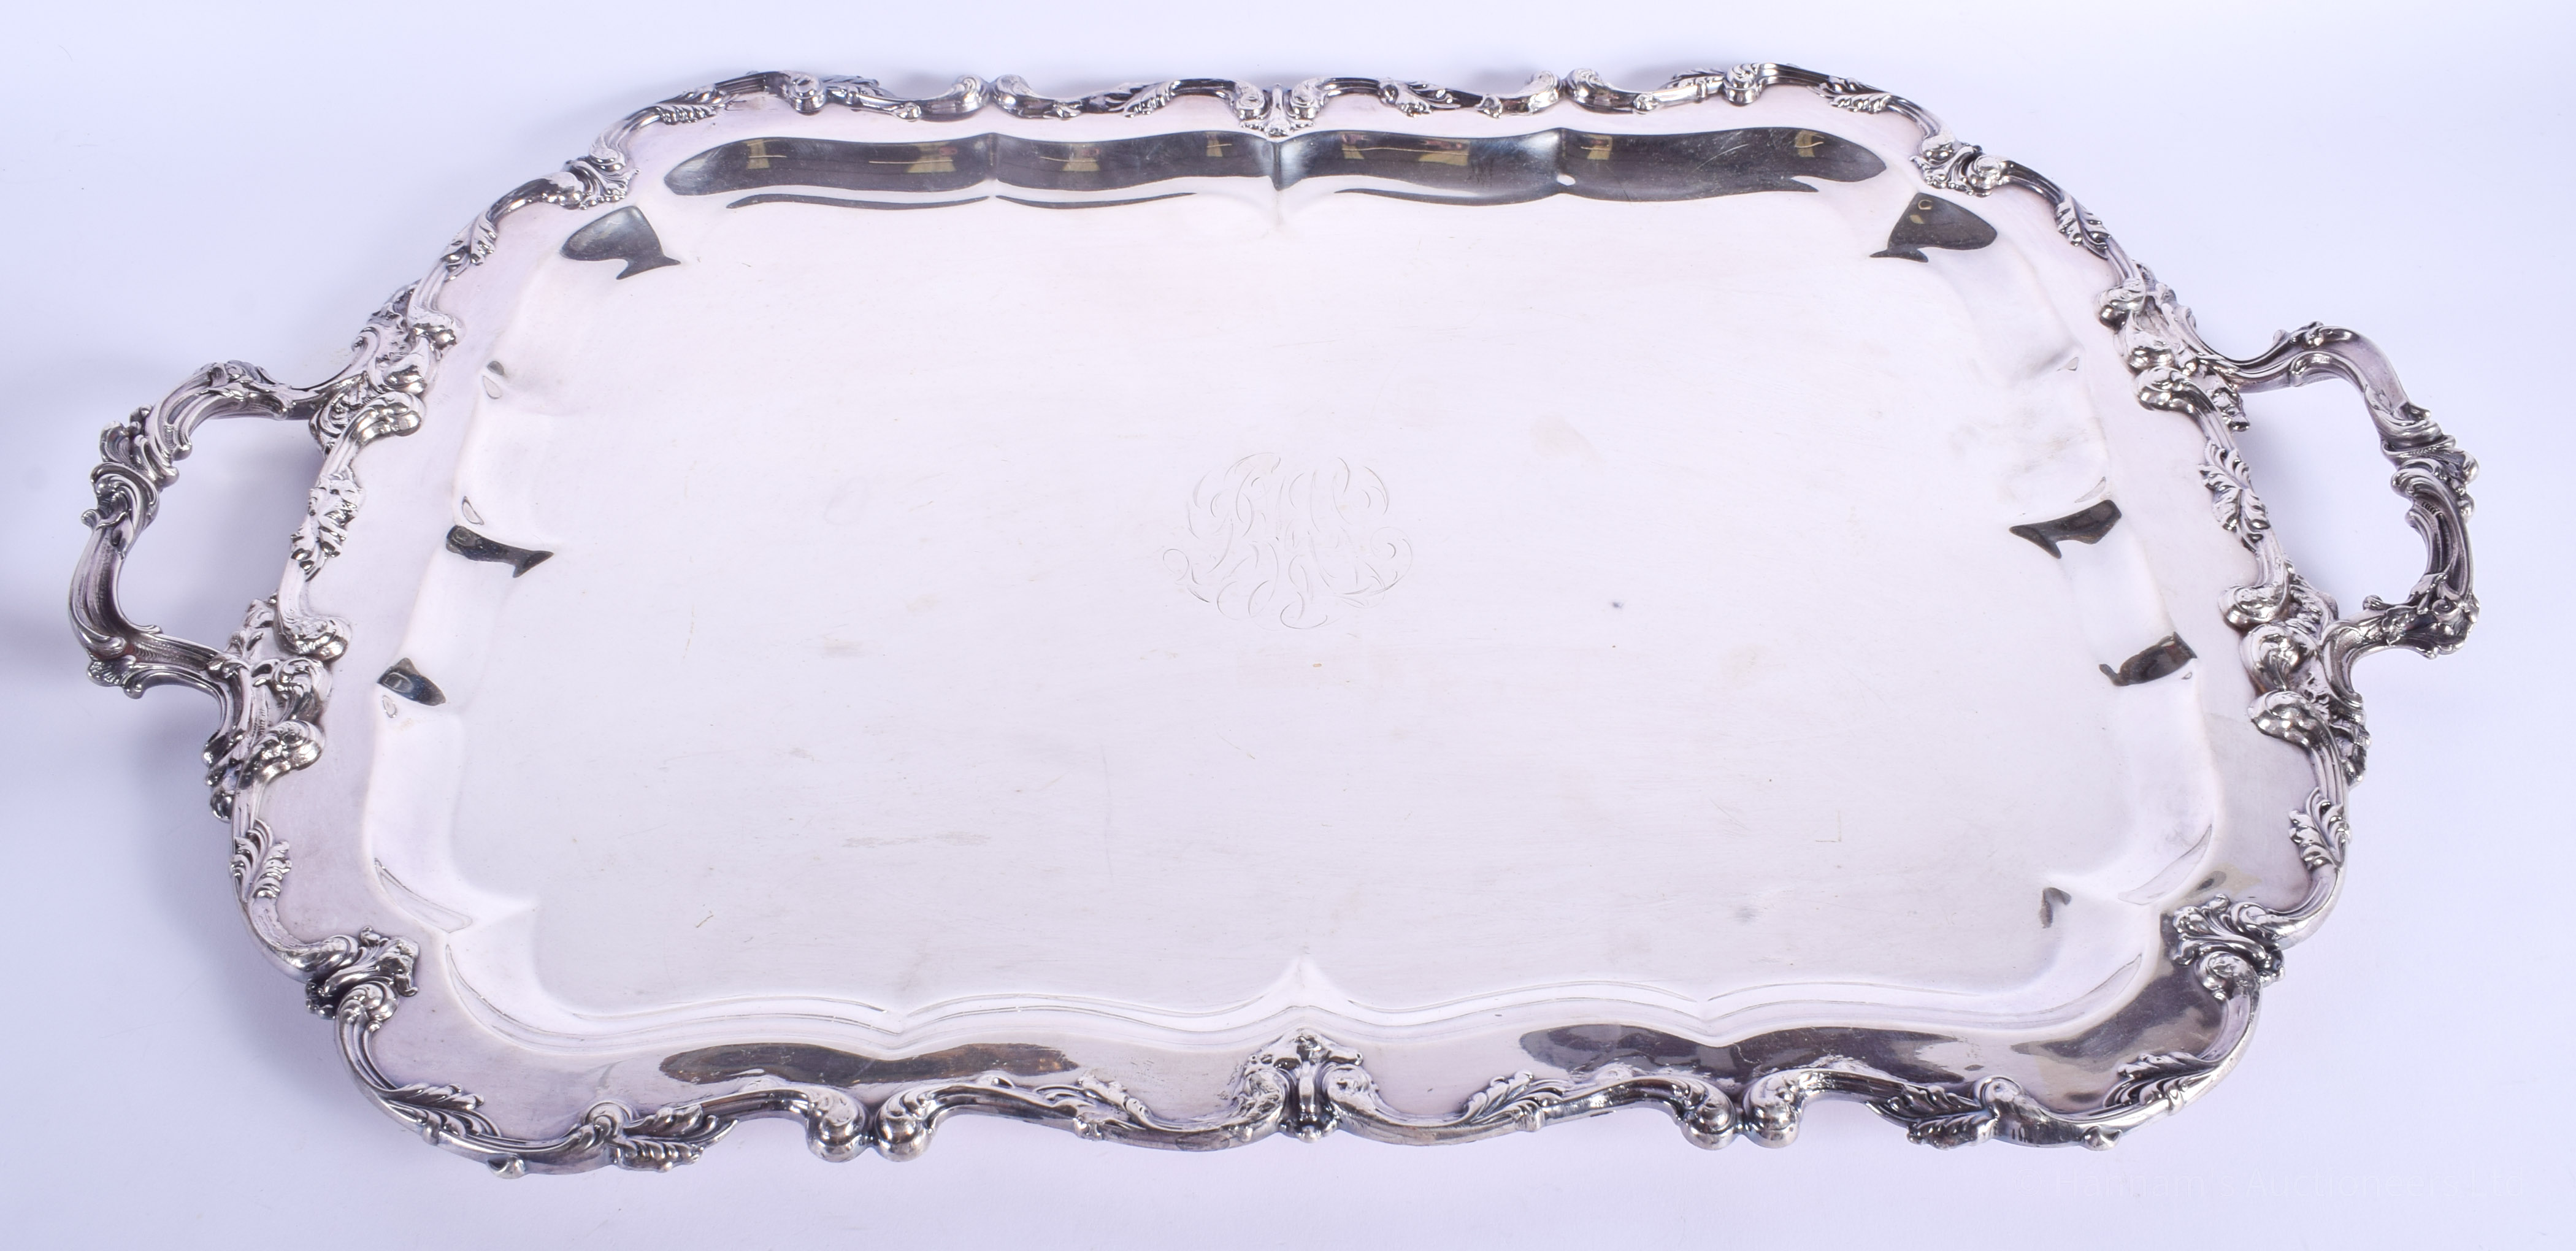 A LARGE AMERICAN GORHAM SILVER MOUNTED TWIN HANDLED TRAY with central monogram. 70 cm x 42 cm.